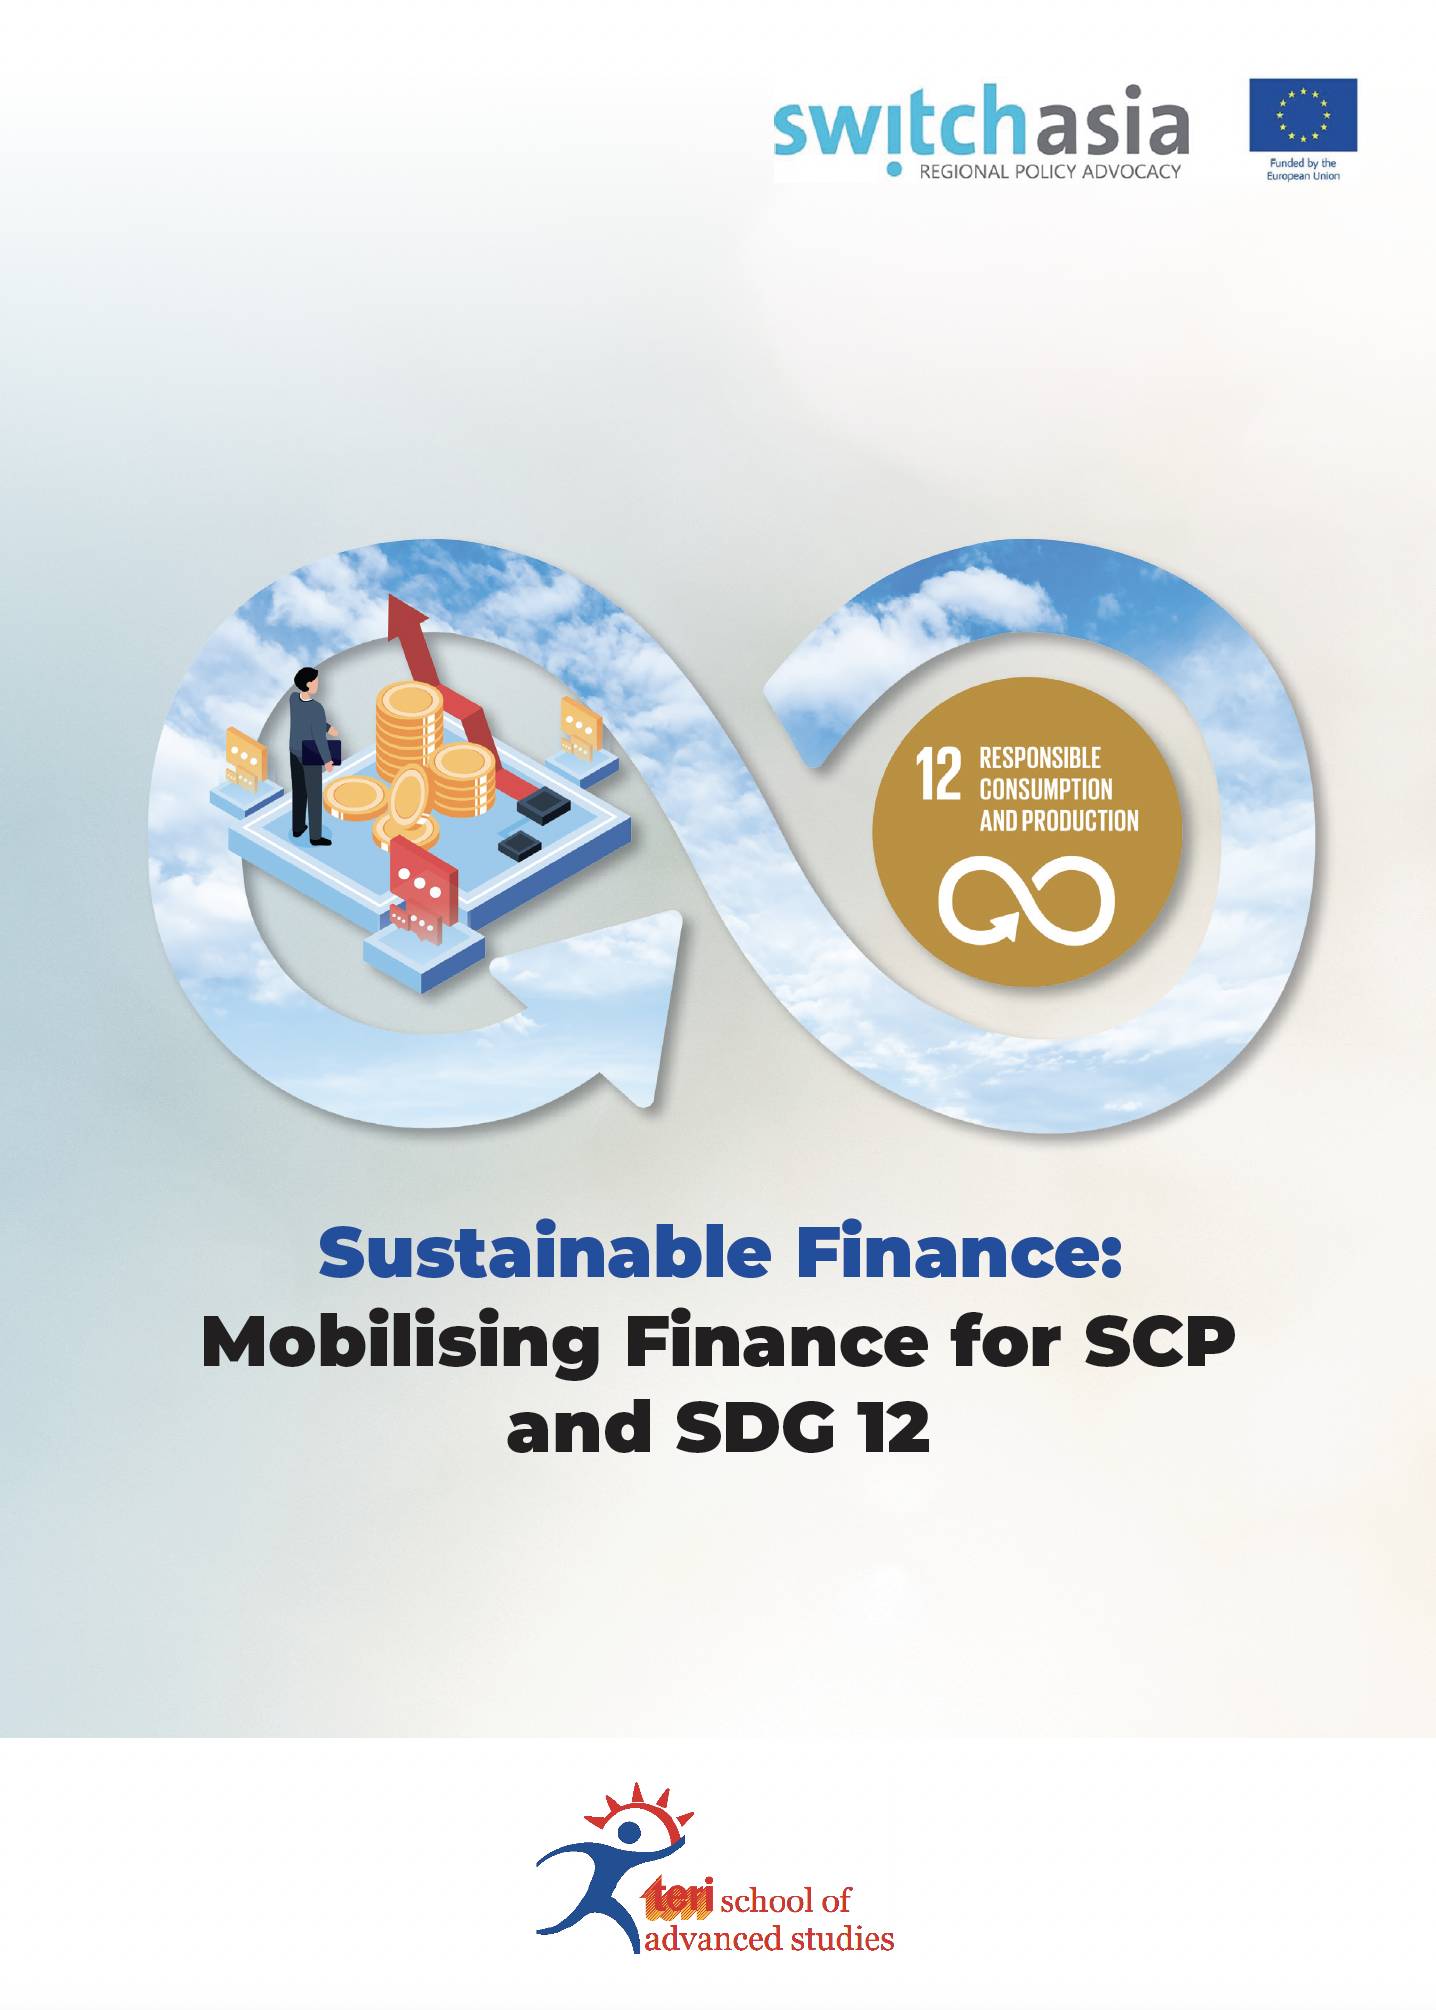 Sustainable Finance: Mobilising Finance for SCP and SDG12